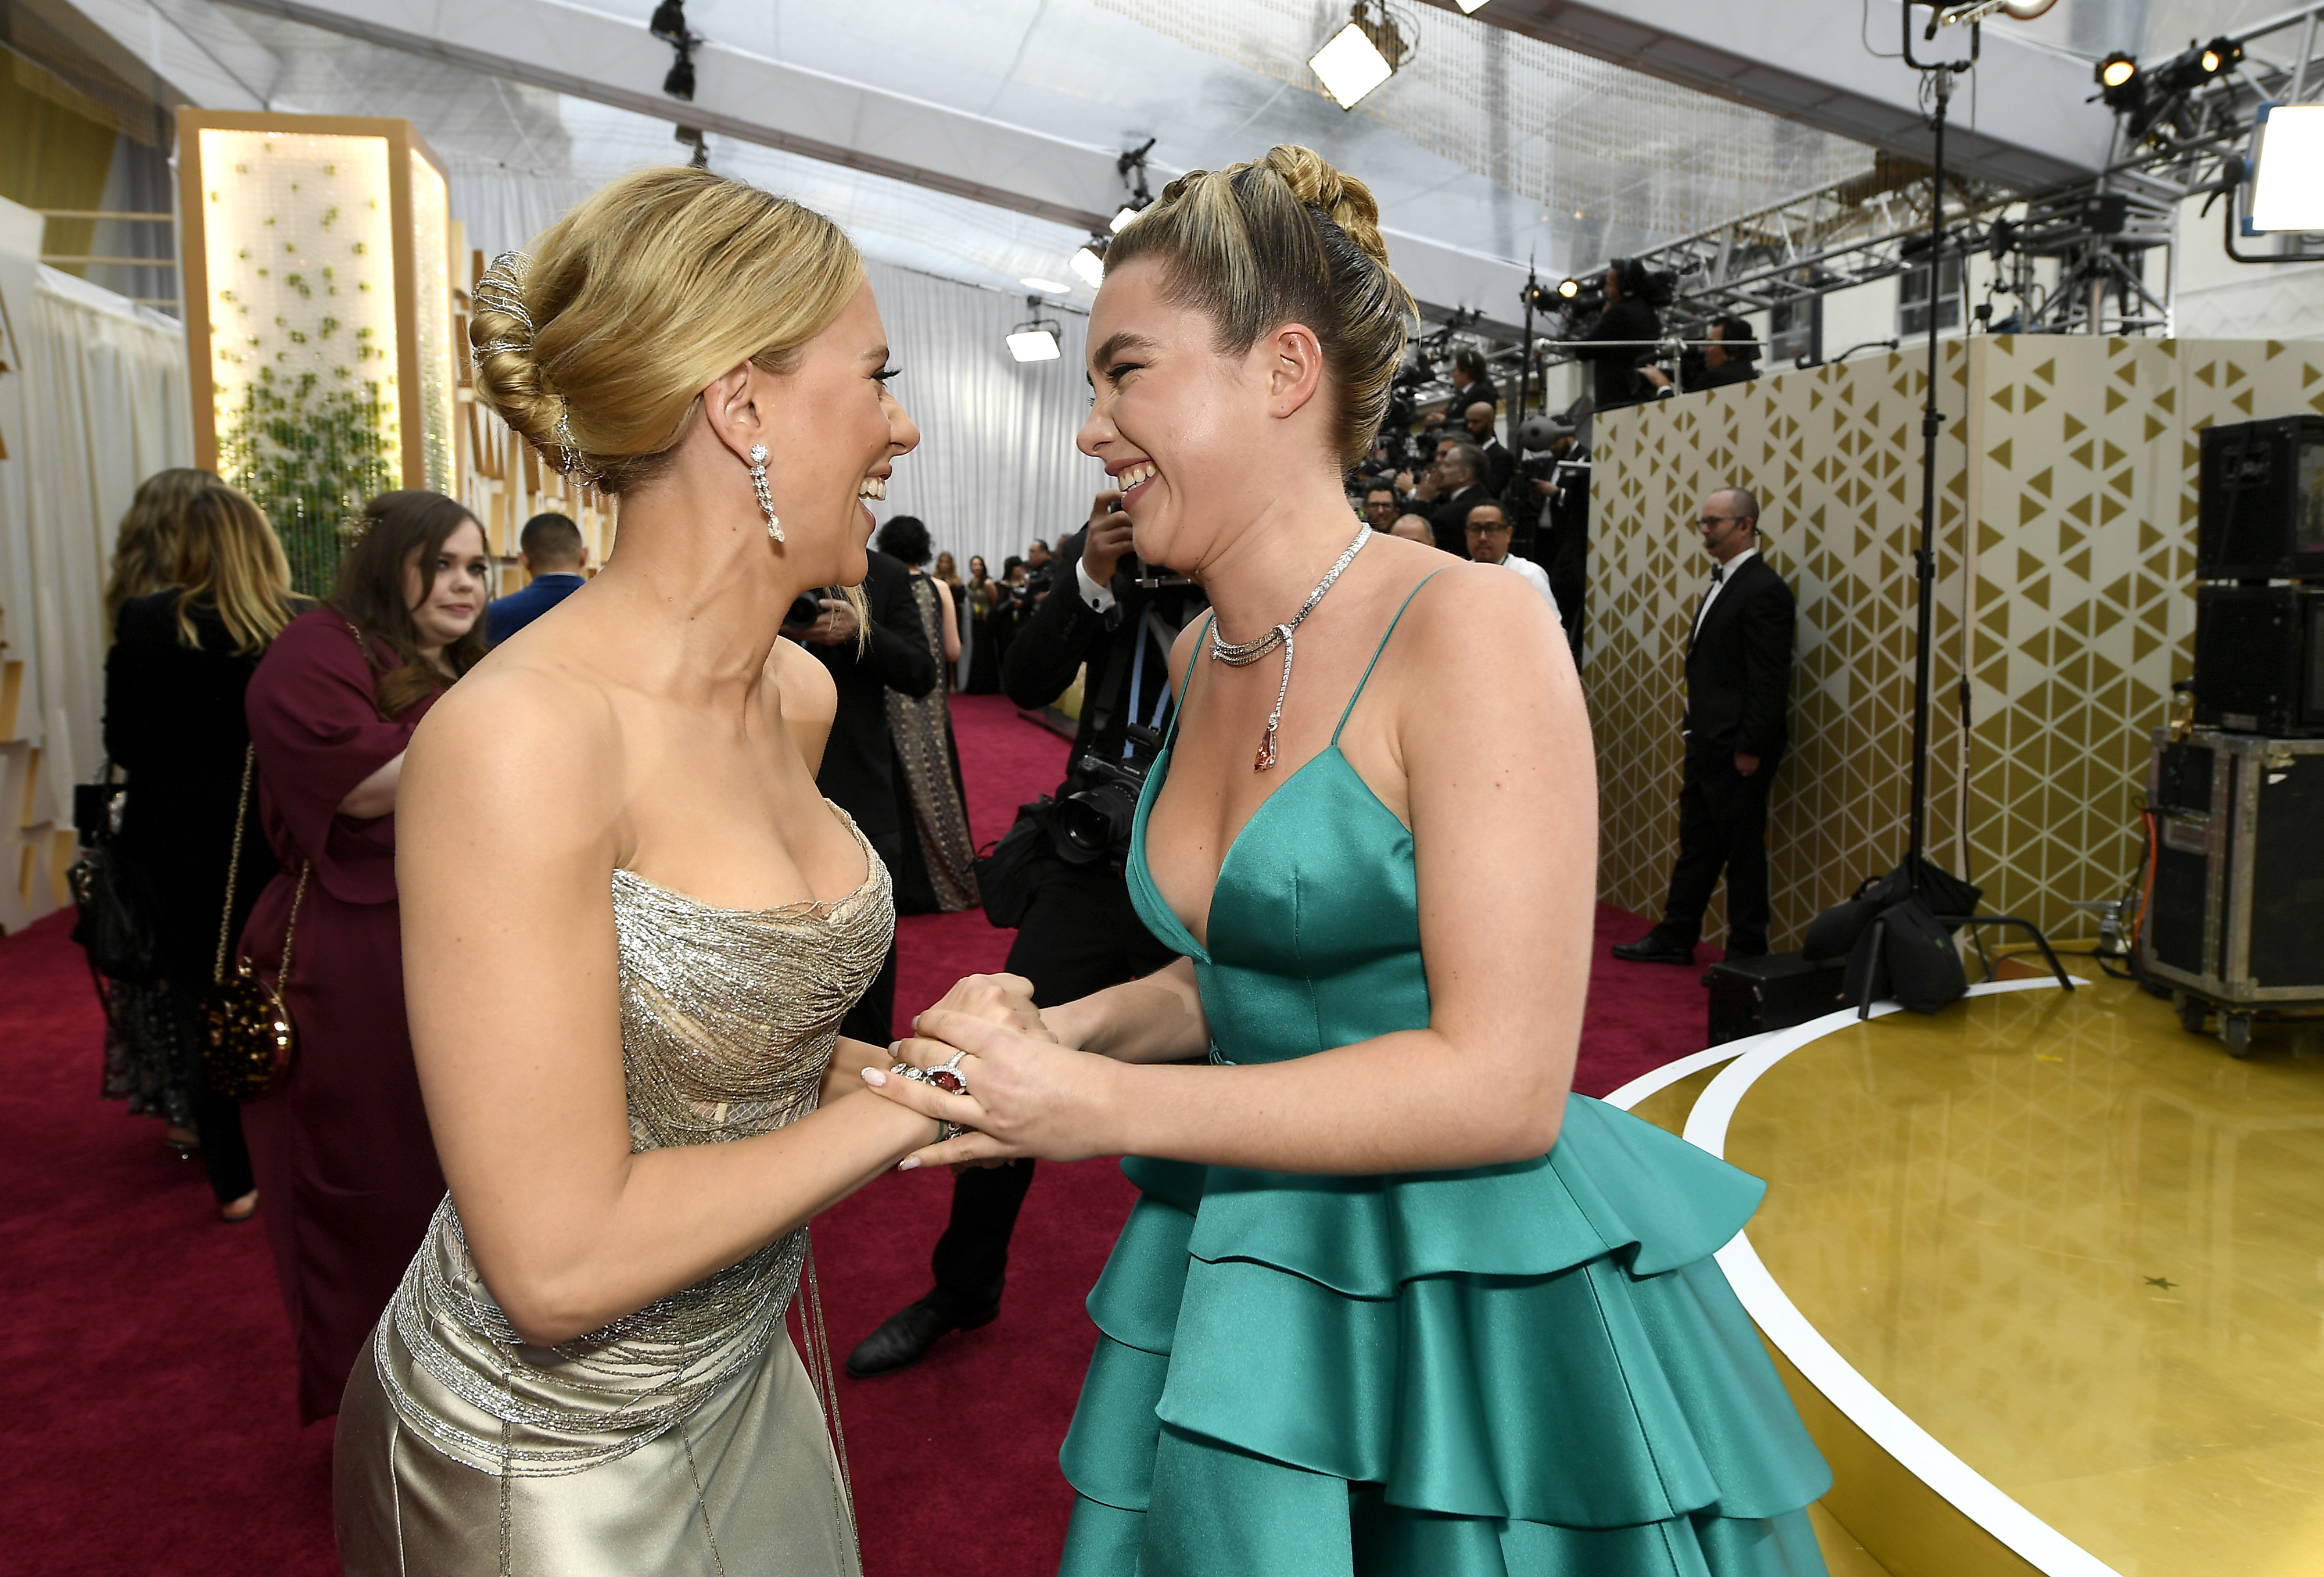 'Black Widow' stars Scarlett Johansson and Florence Pugh smile at one another and hold hands on the red carpet. Johansson wears a strapless sparkly silver dress. Pugh wears a teal dress.